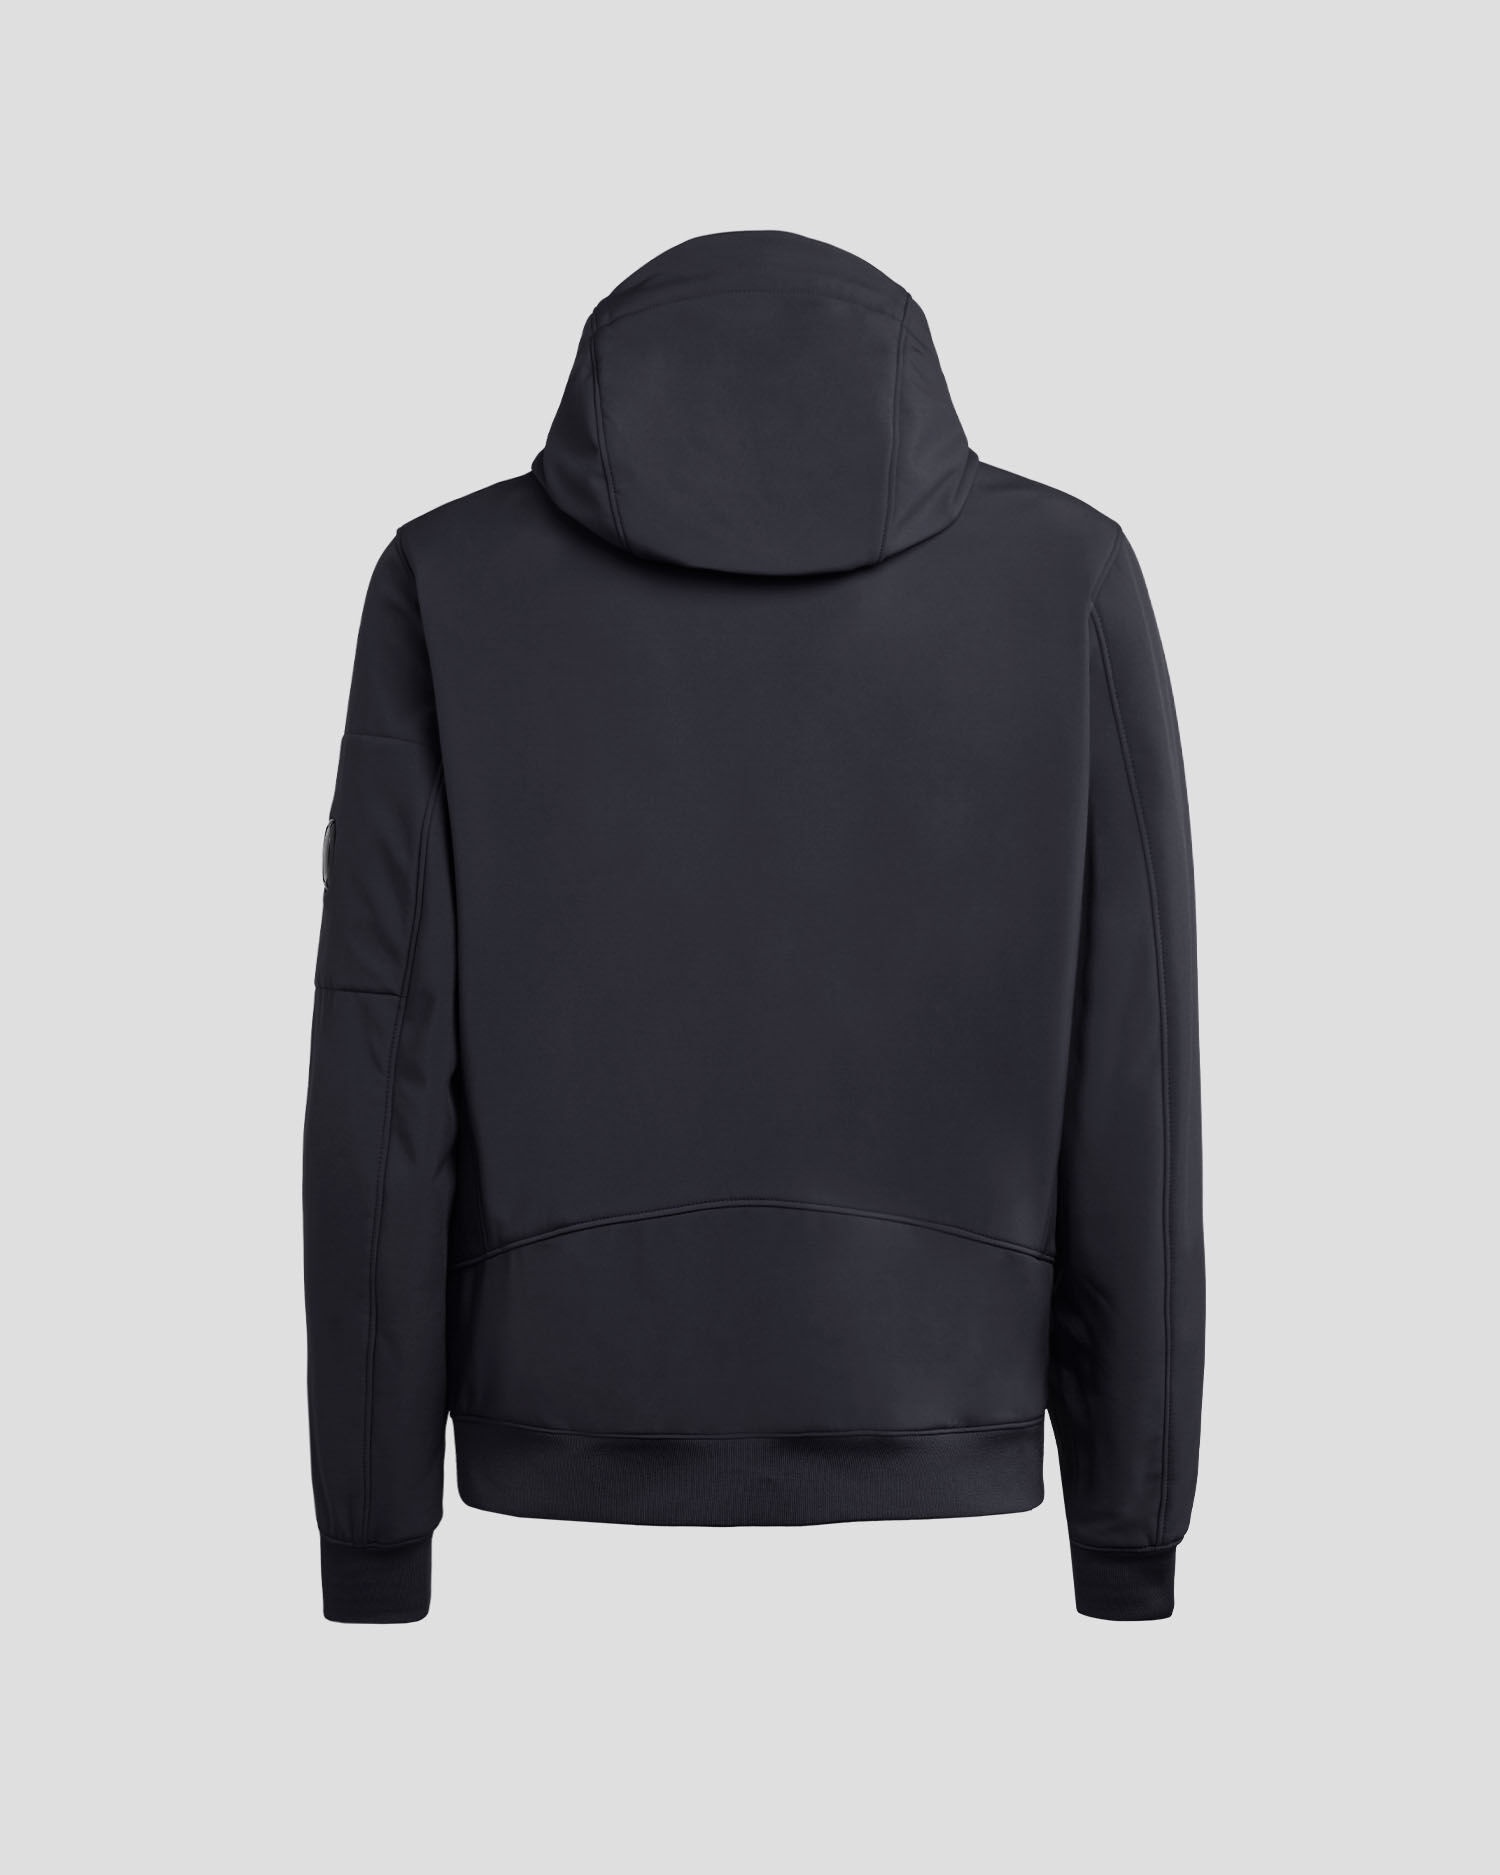 C.P. Shell-R Hooded Jacket - 9